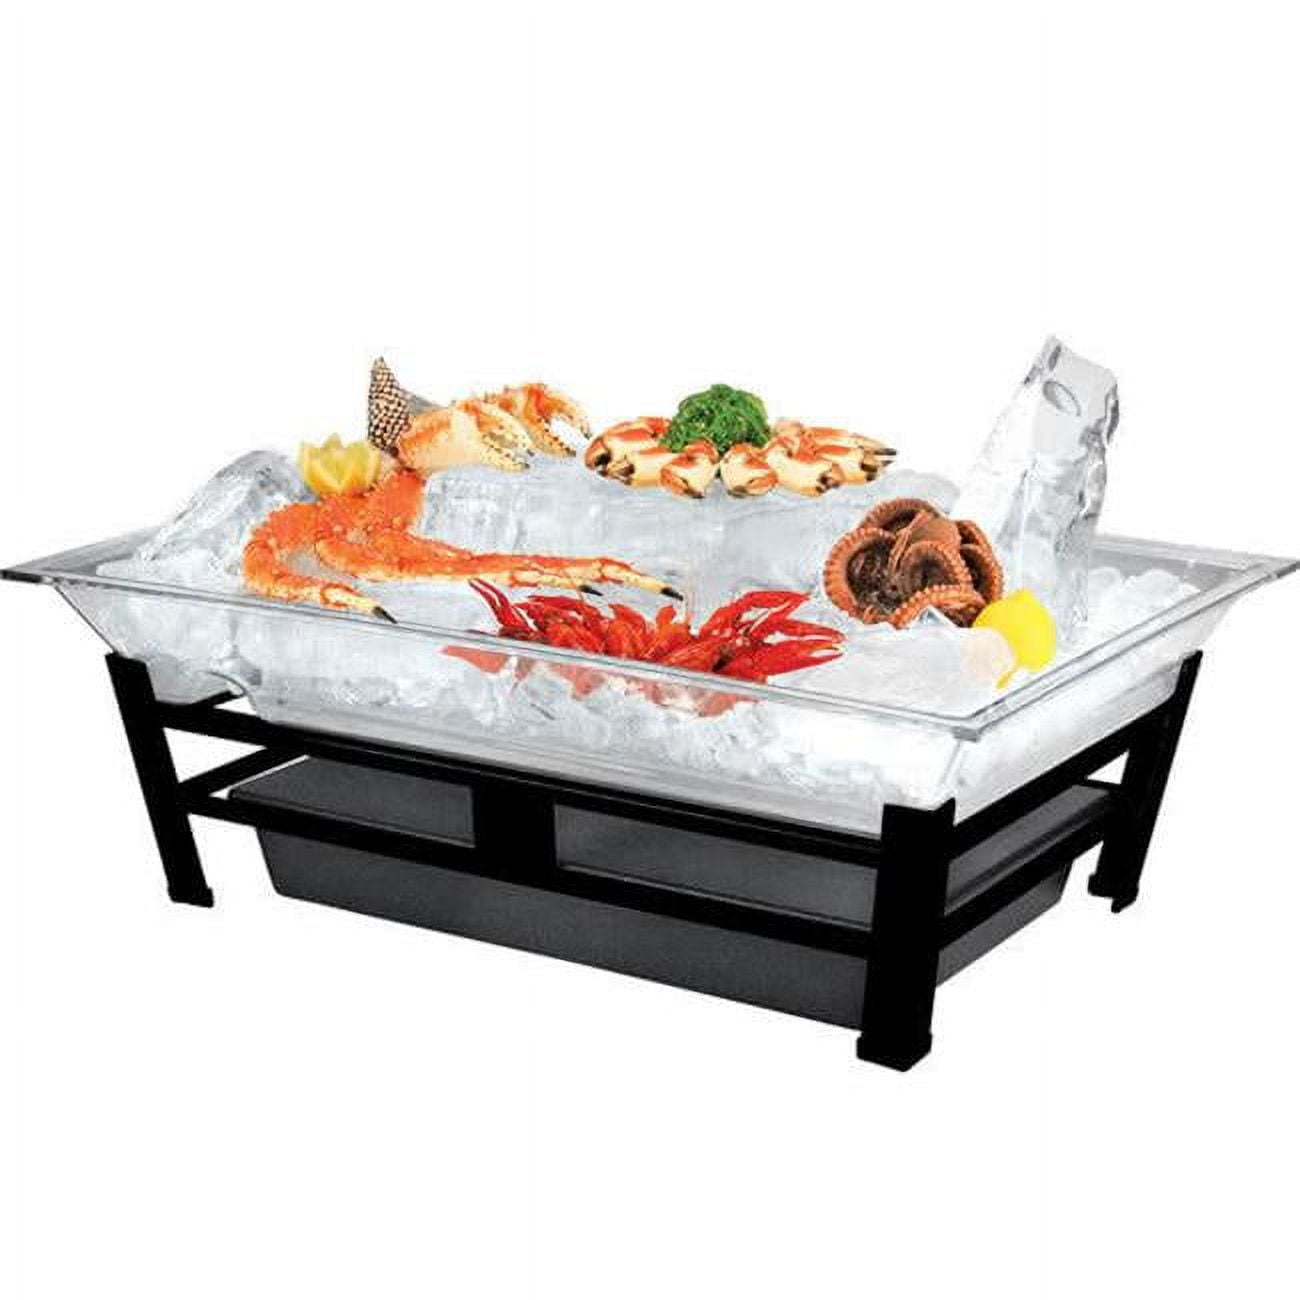 Picture of Cal Mil IP1020-13 19 x 27 in. Ice Display - Black